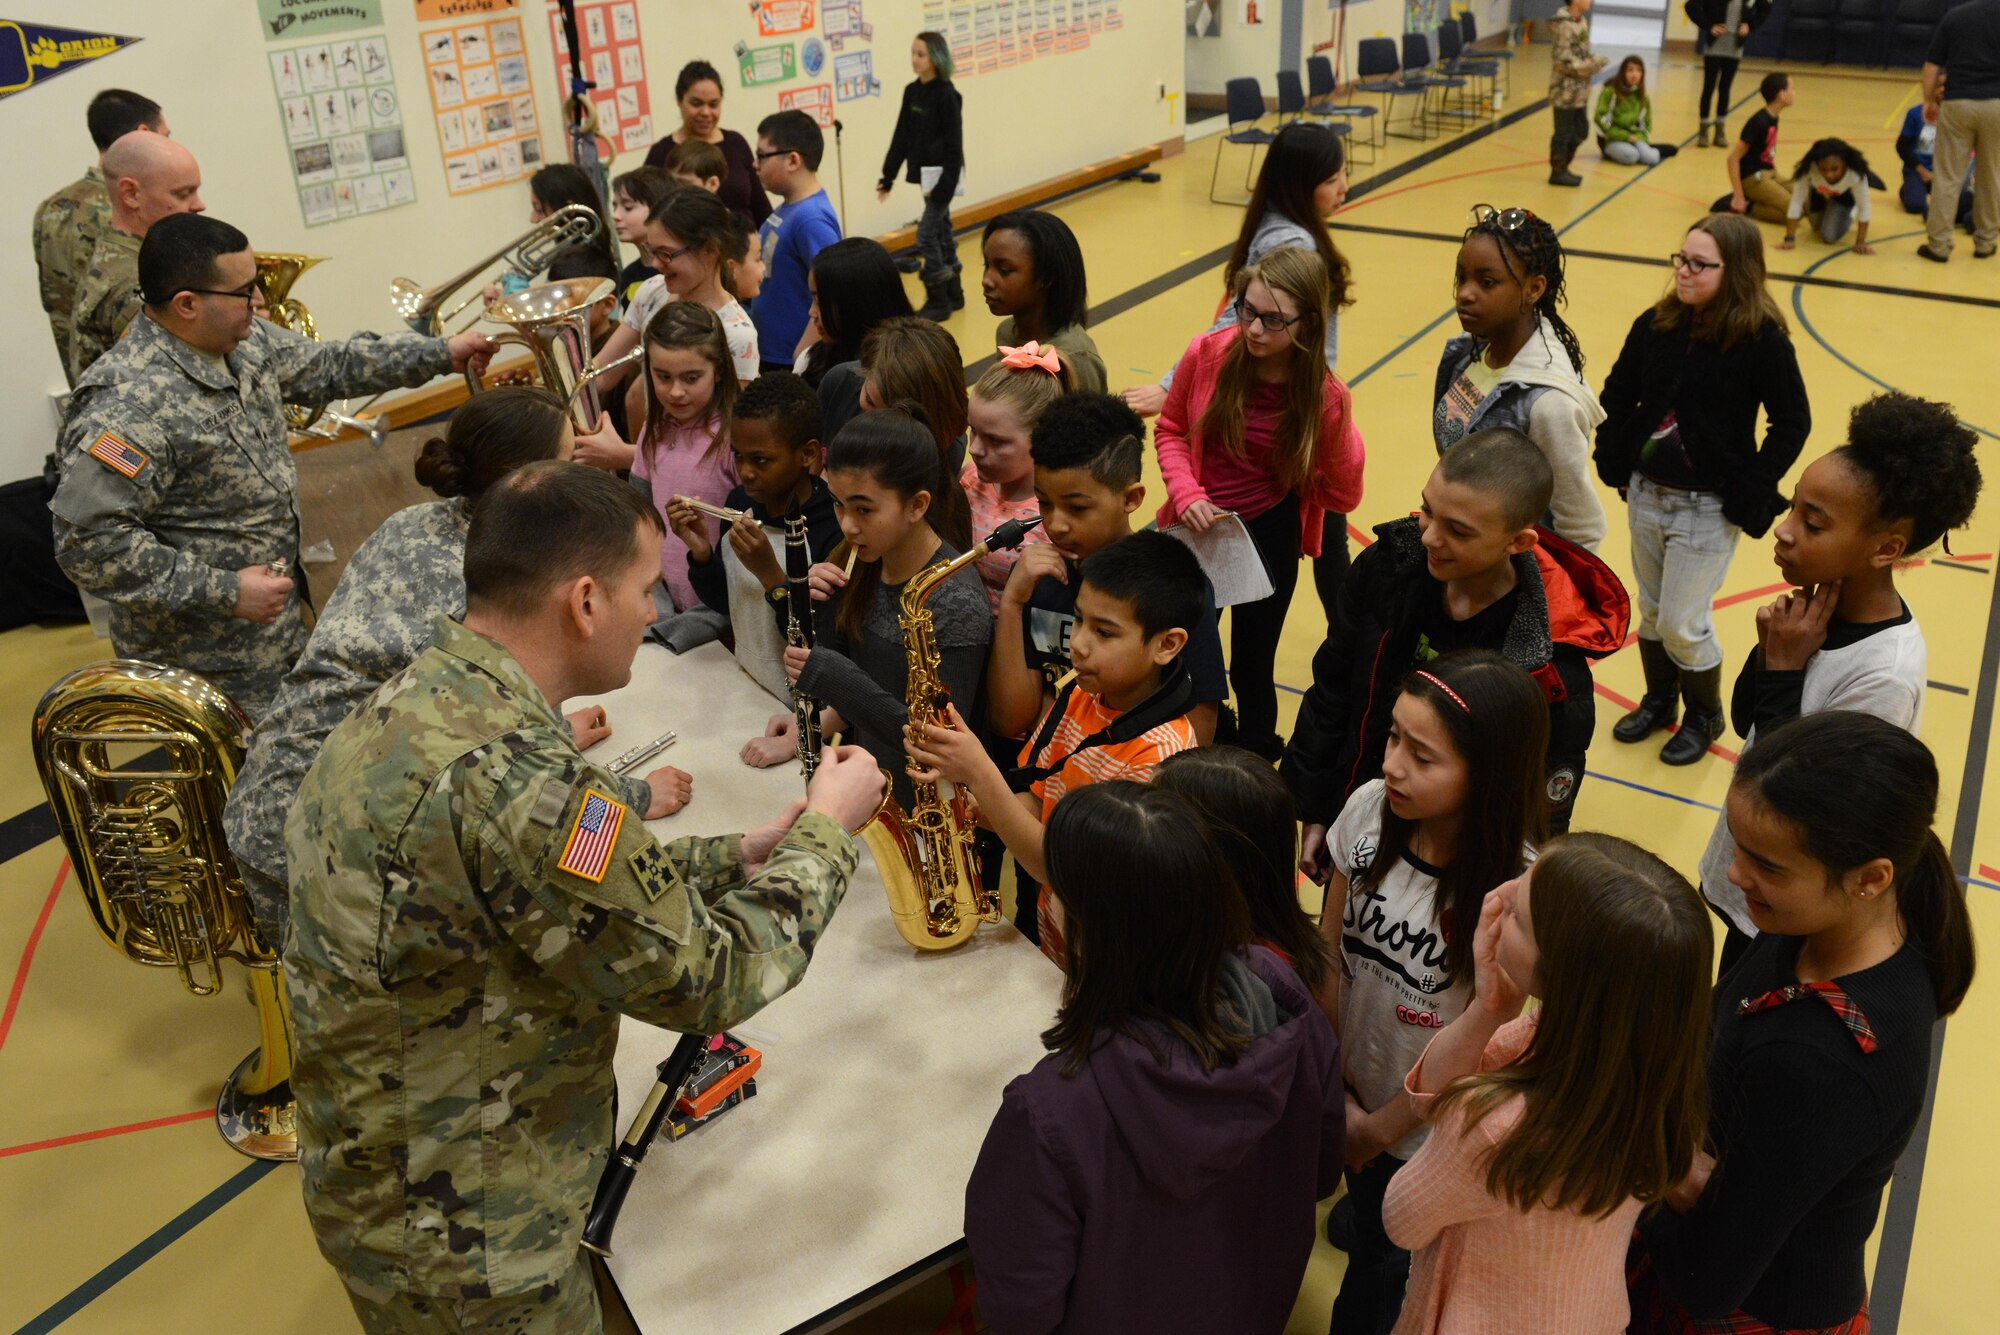 The 9th Army Band group ‘Frigid Brass’ teach 4th and 5th graders how to play different instruments at Orion Elementary School, Joint Base Elmendorf-Richardson, Alaska, Feb. 21, 2017. ‘Frigid Brass’ performed many different genres of music and taught the children the first steps in playing each instrument to spark an interest in the musical arts. 